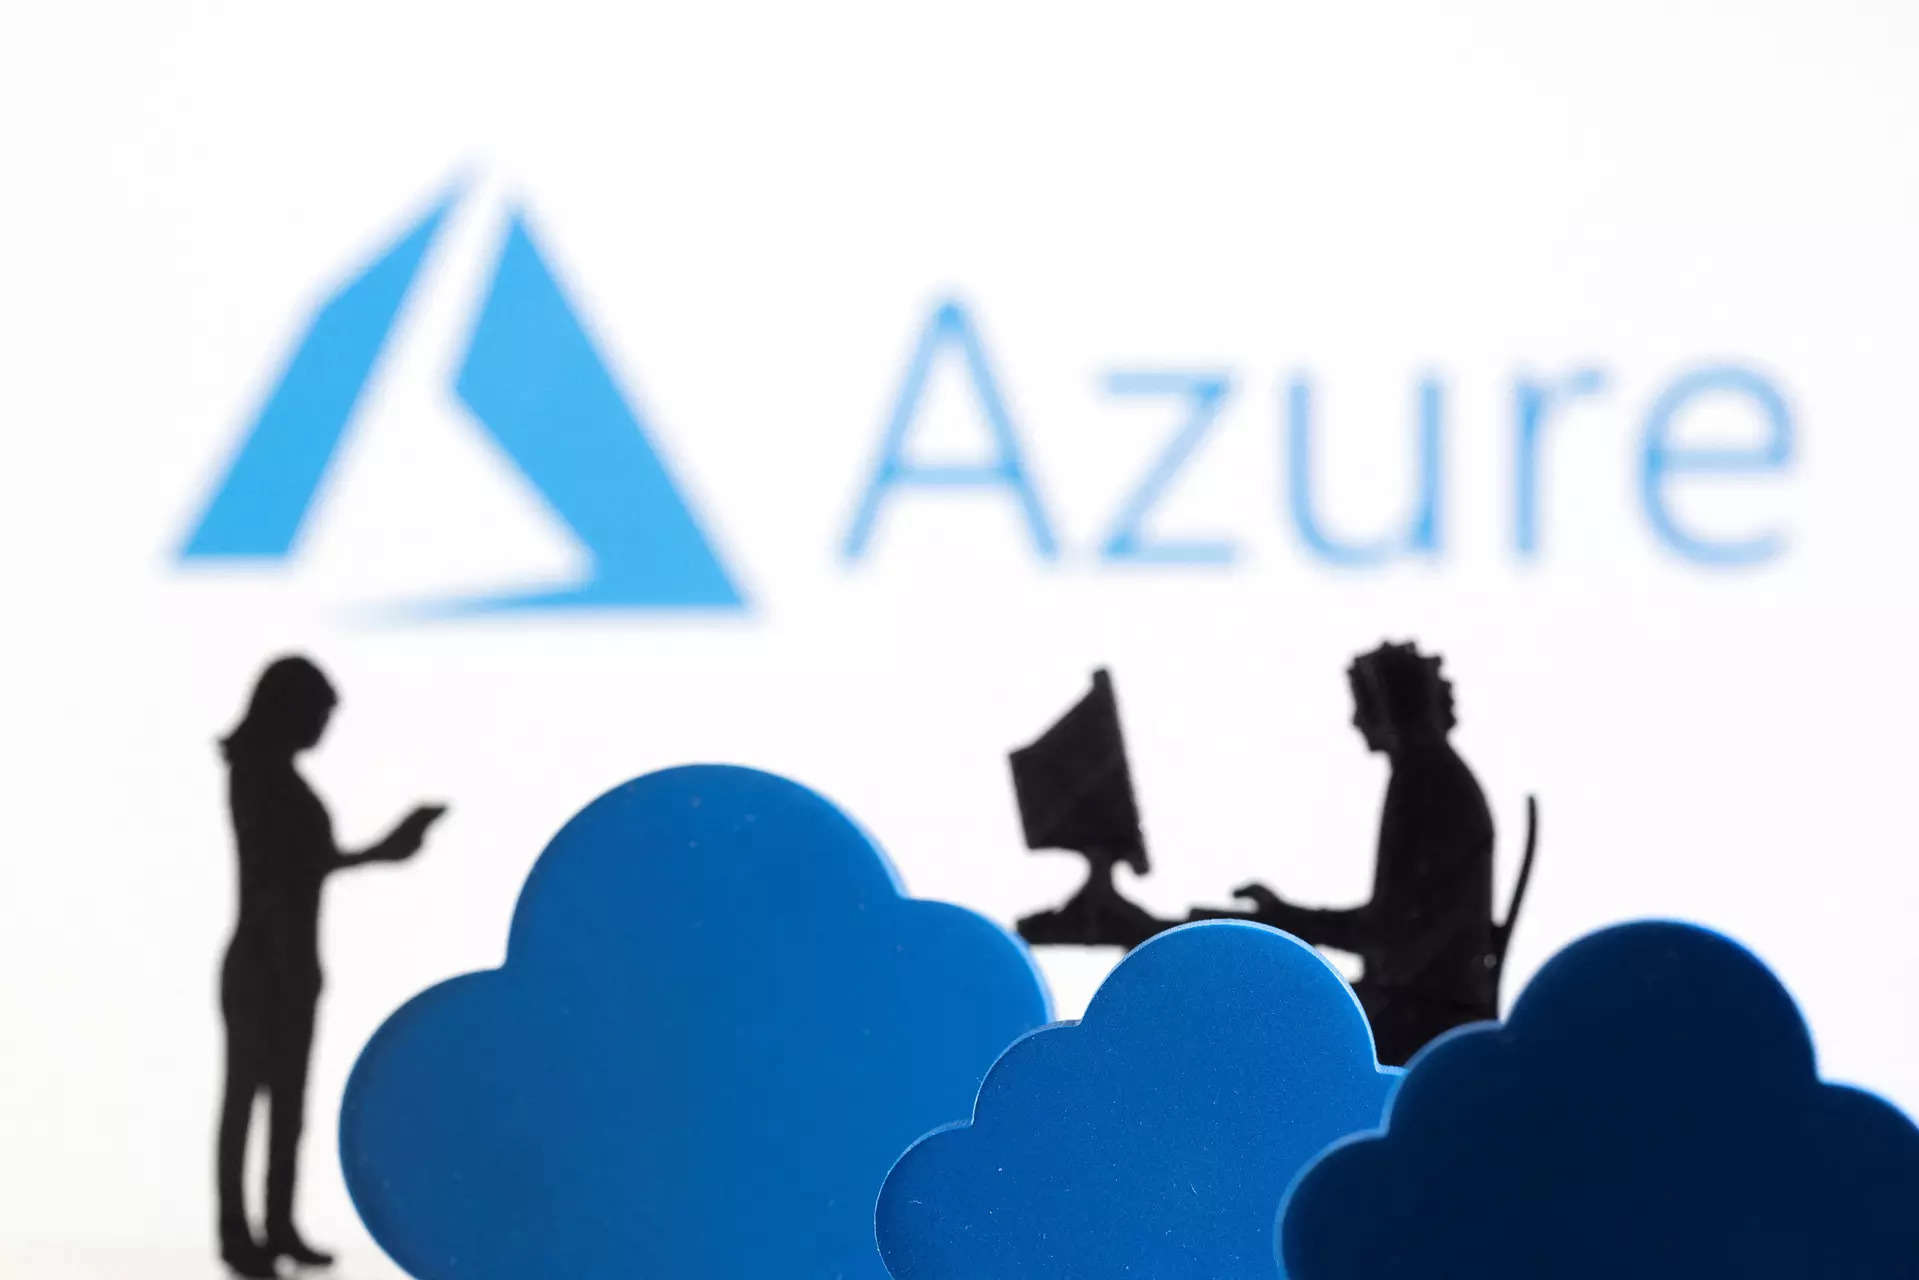 <p>FILE PHOTO: 3D printed clouds and figurines are seen in front of the Microsoft Azure cloud service logo in this illustration taken February 8, 2022. REUTERS/Dado Ruvic/Illustration</p>